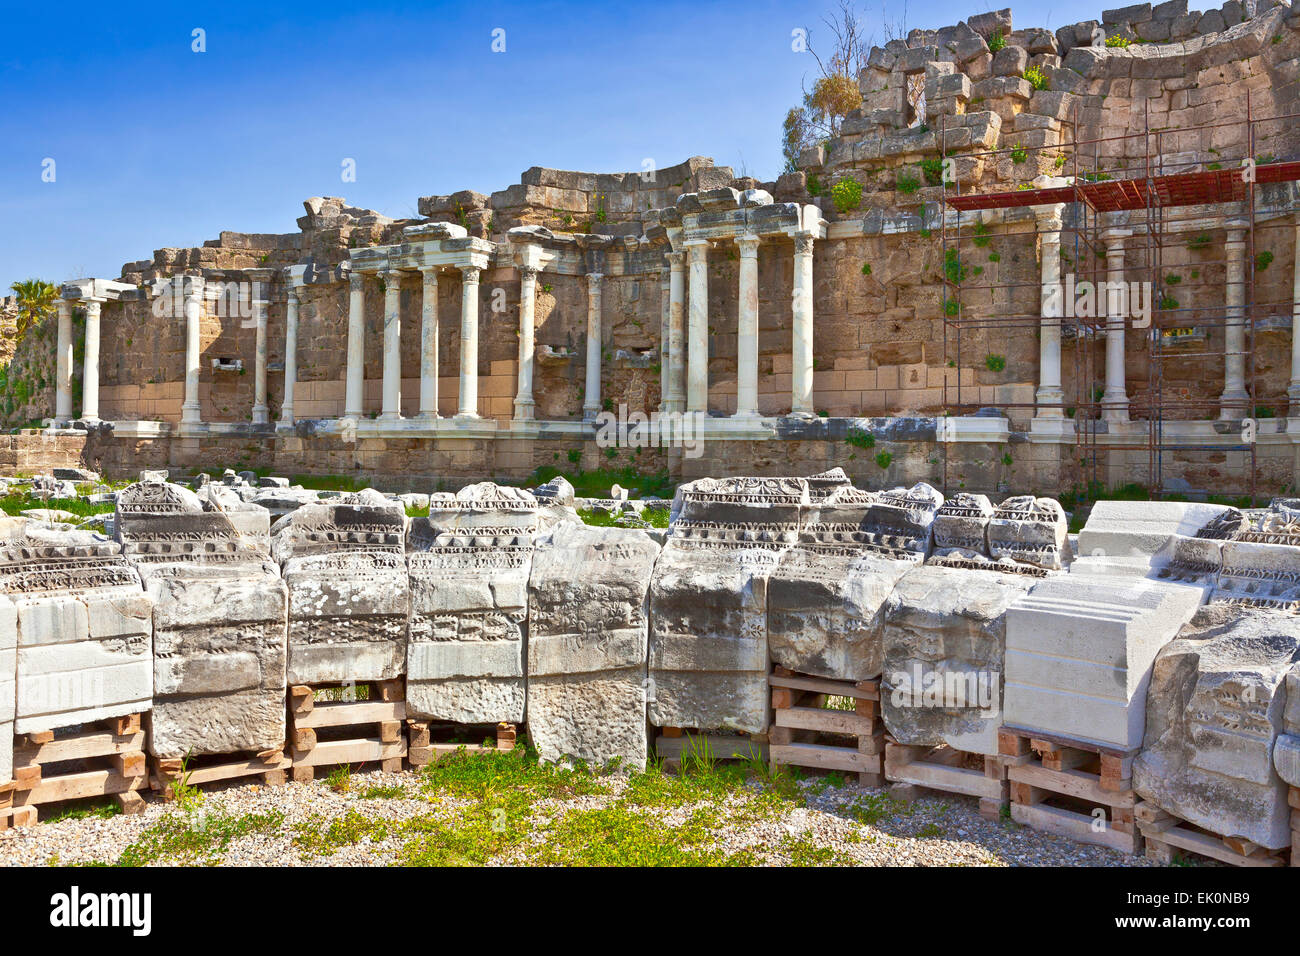 Roman ruins at the ancent town of Side in Turkey. Stock Photo